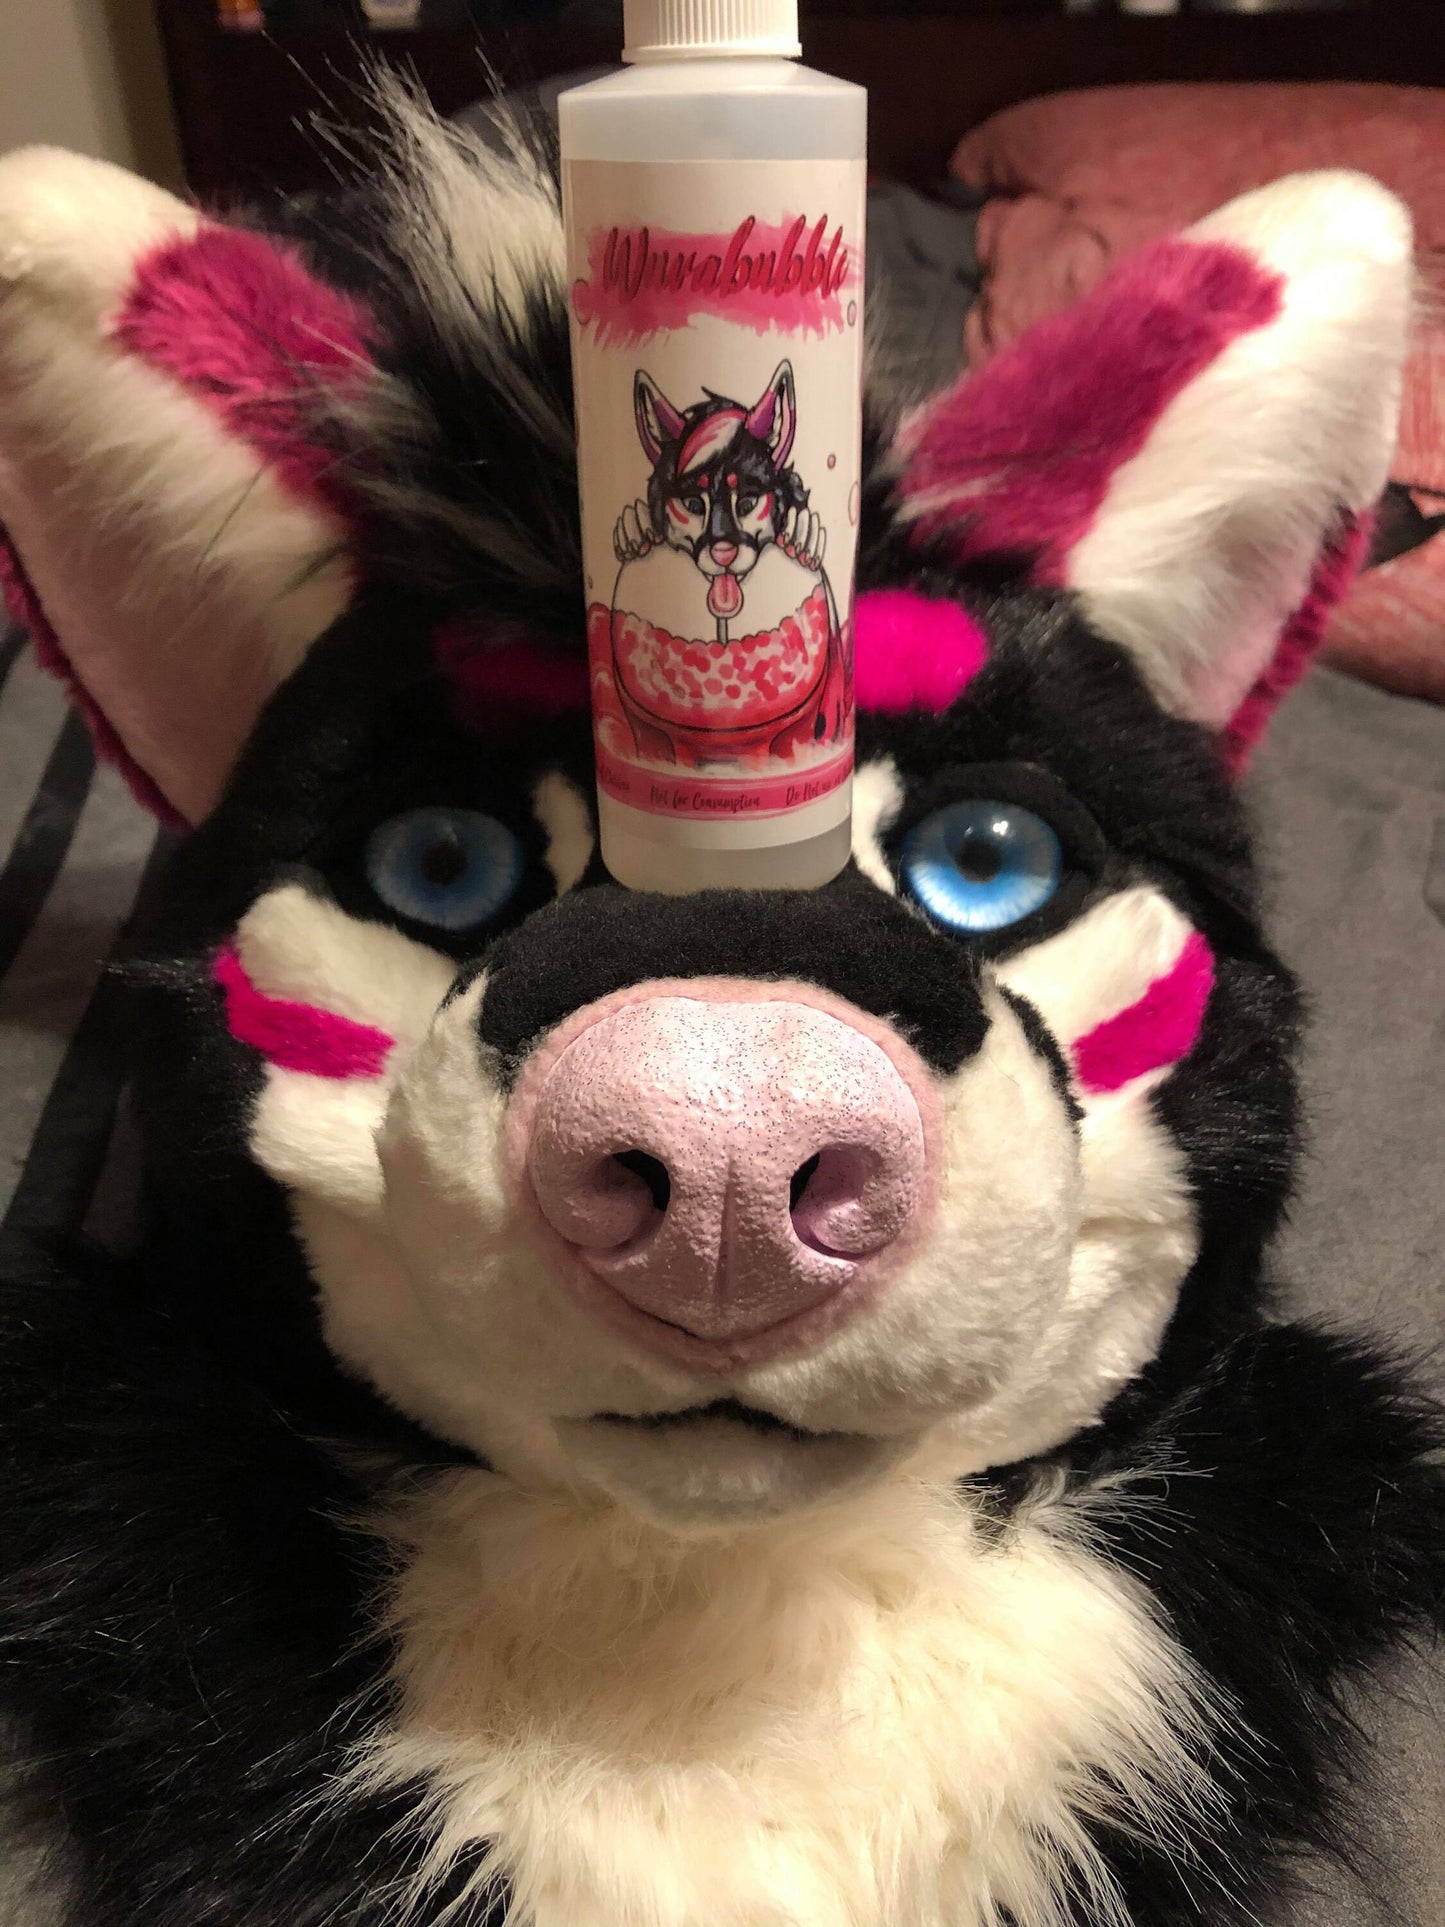 Fursuit Spray Bubblegum Wuvabubble Bottle Fragrance and Cleaner 8oz Essential Cleaning Costume Cleaner US Buyers Only